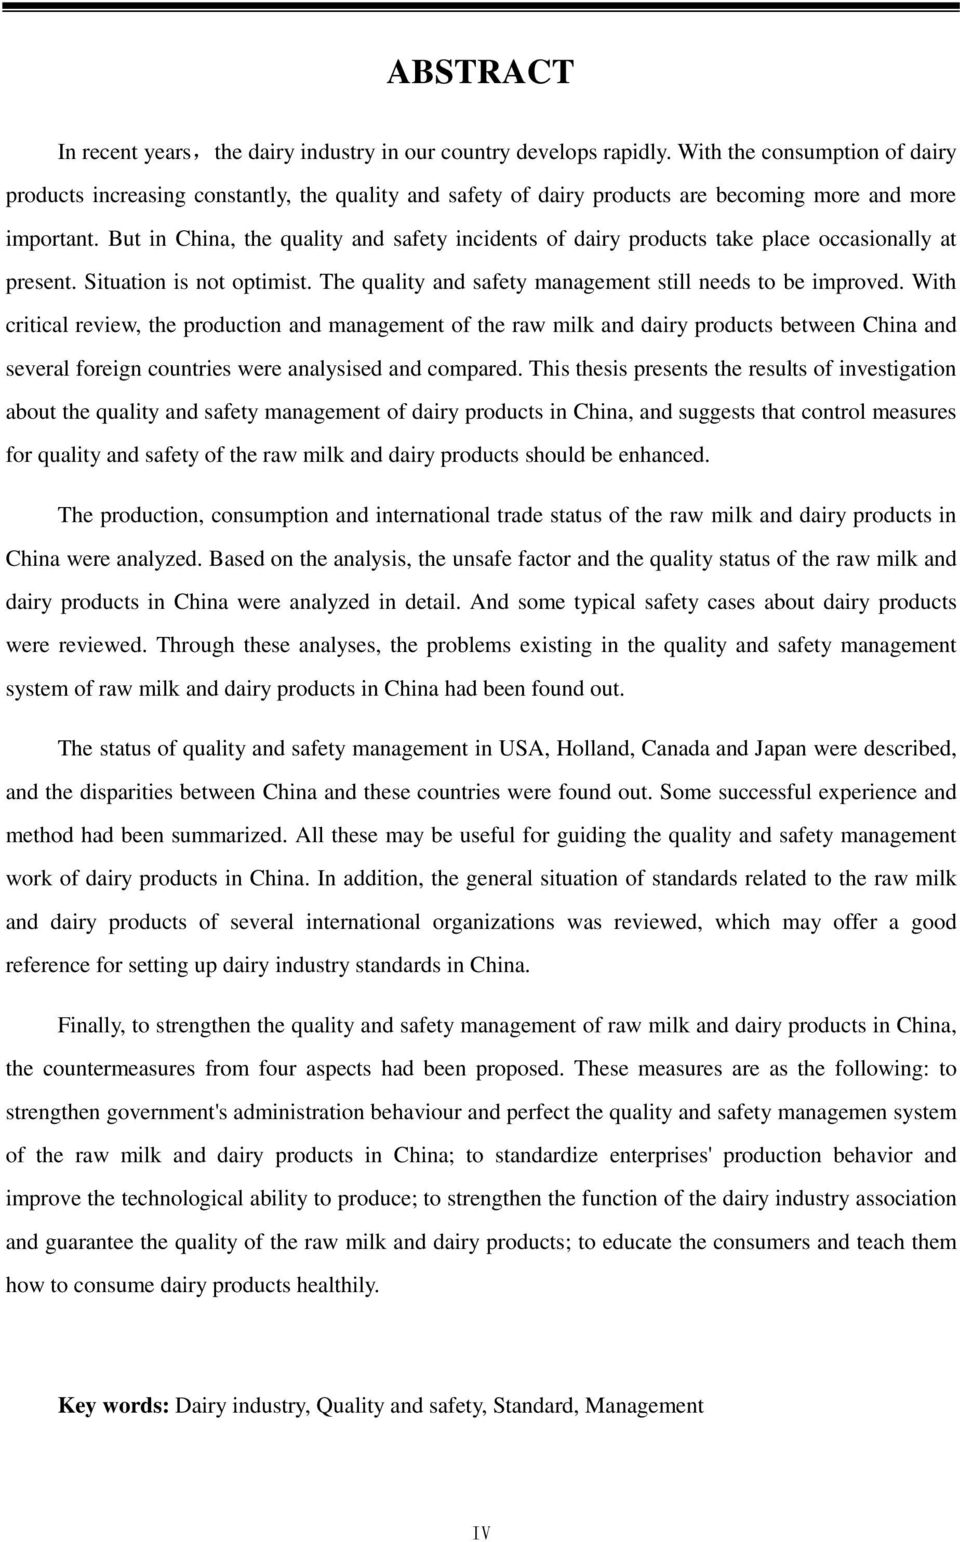 But in China, the quality and safety incidents of dairy products take place occasionally at present. Situation is not optimist. The quality and safety management still needs to be improved.